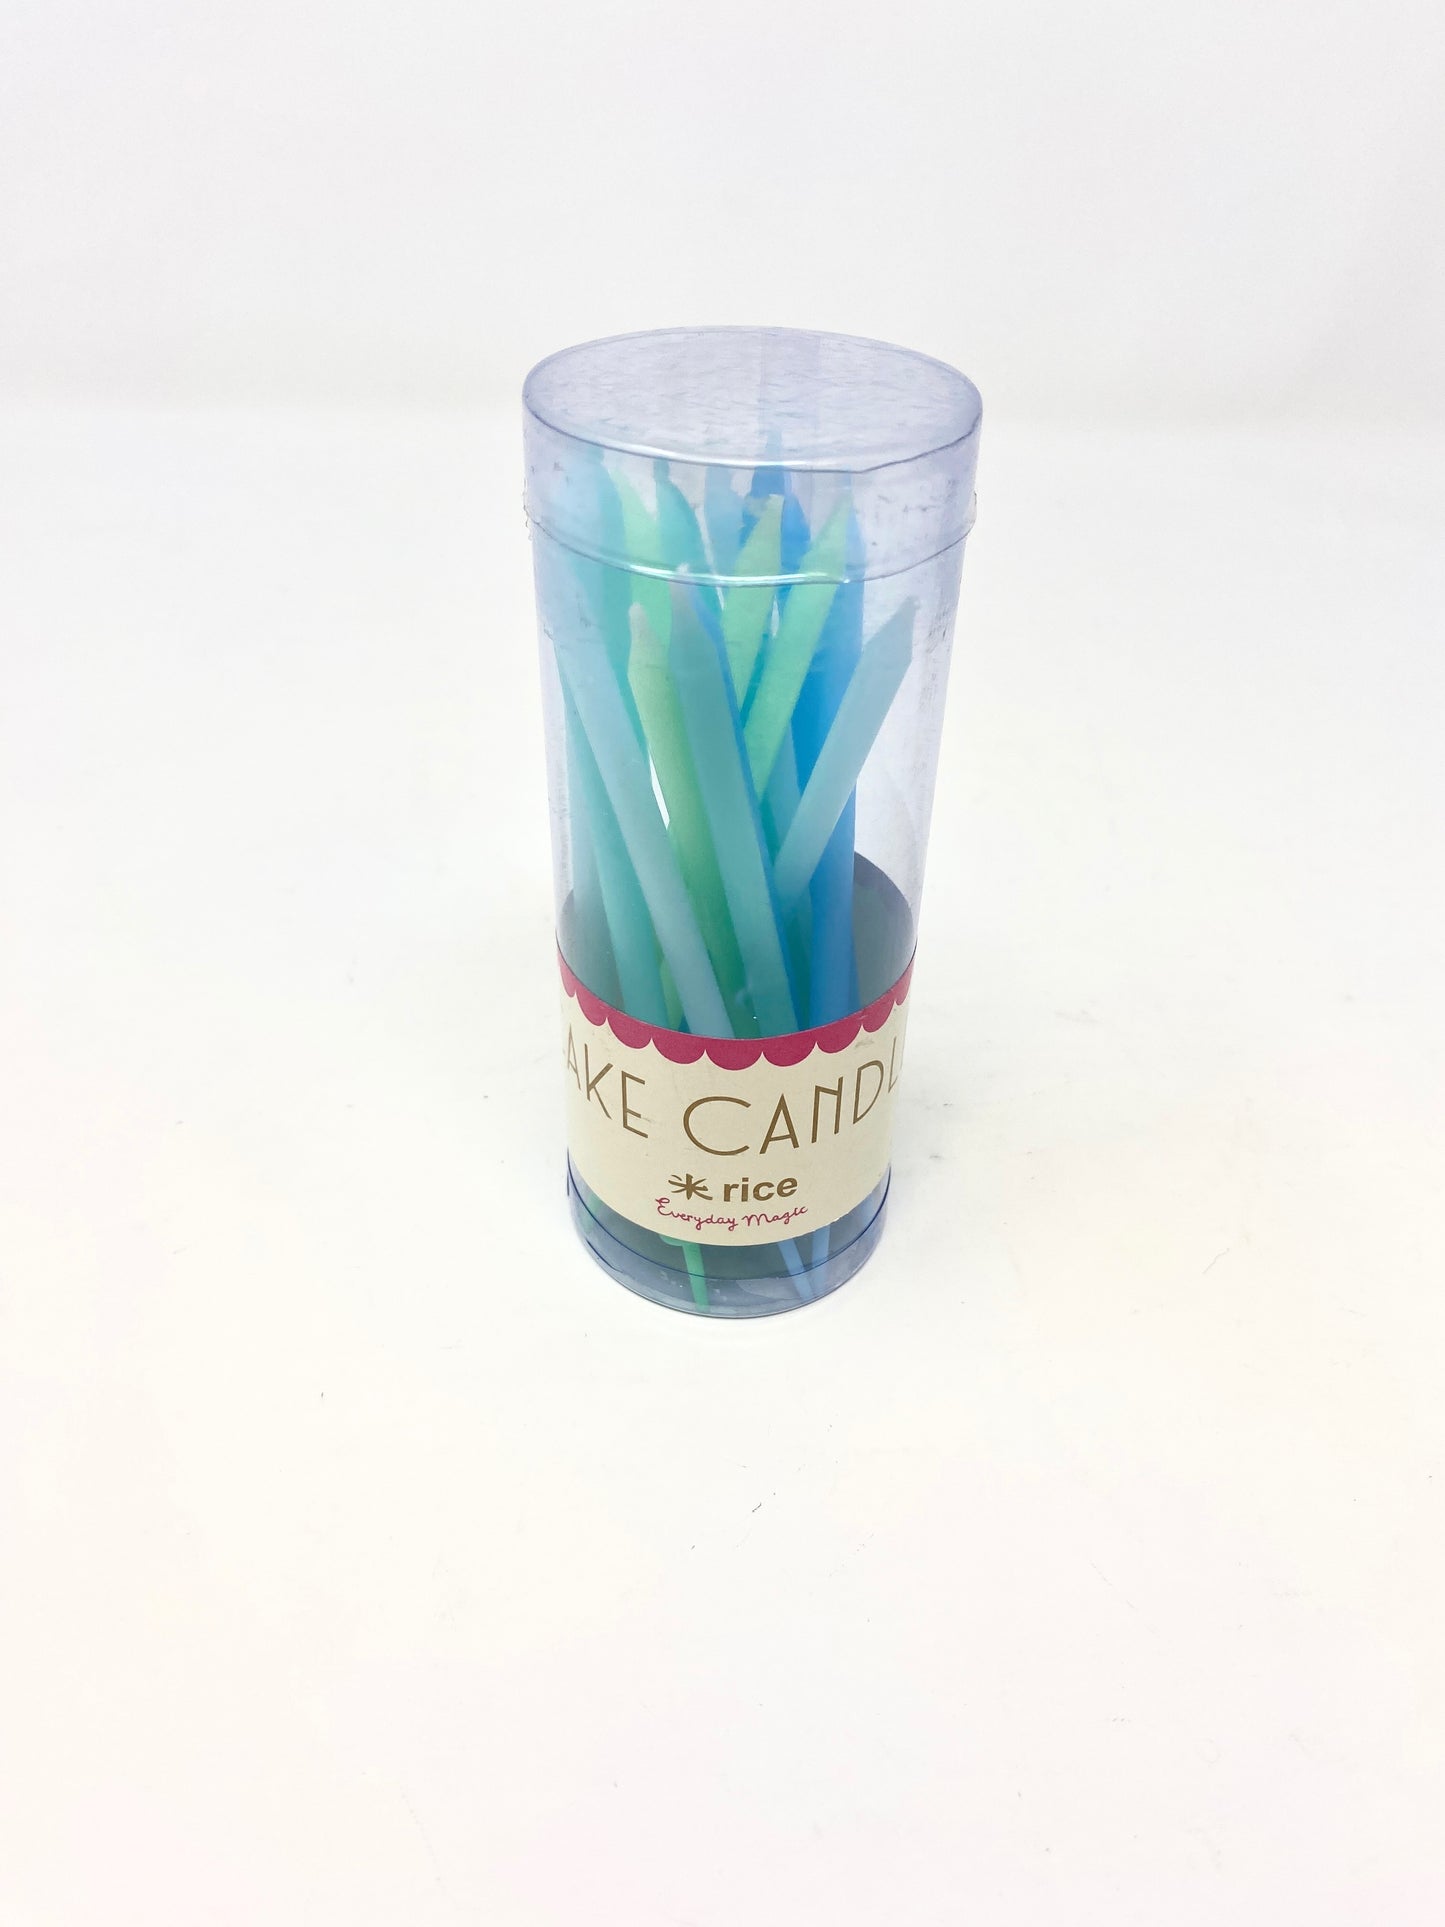 Blue Candles "Everyday Magic"